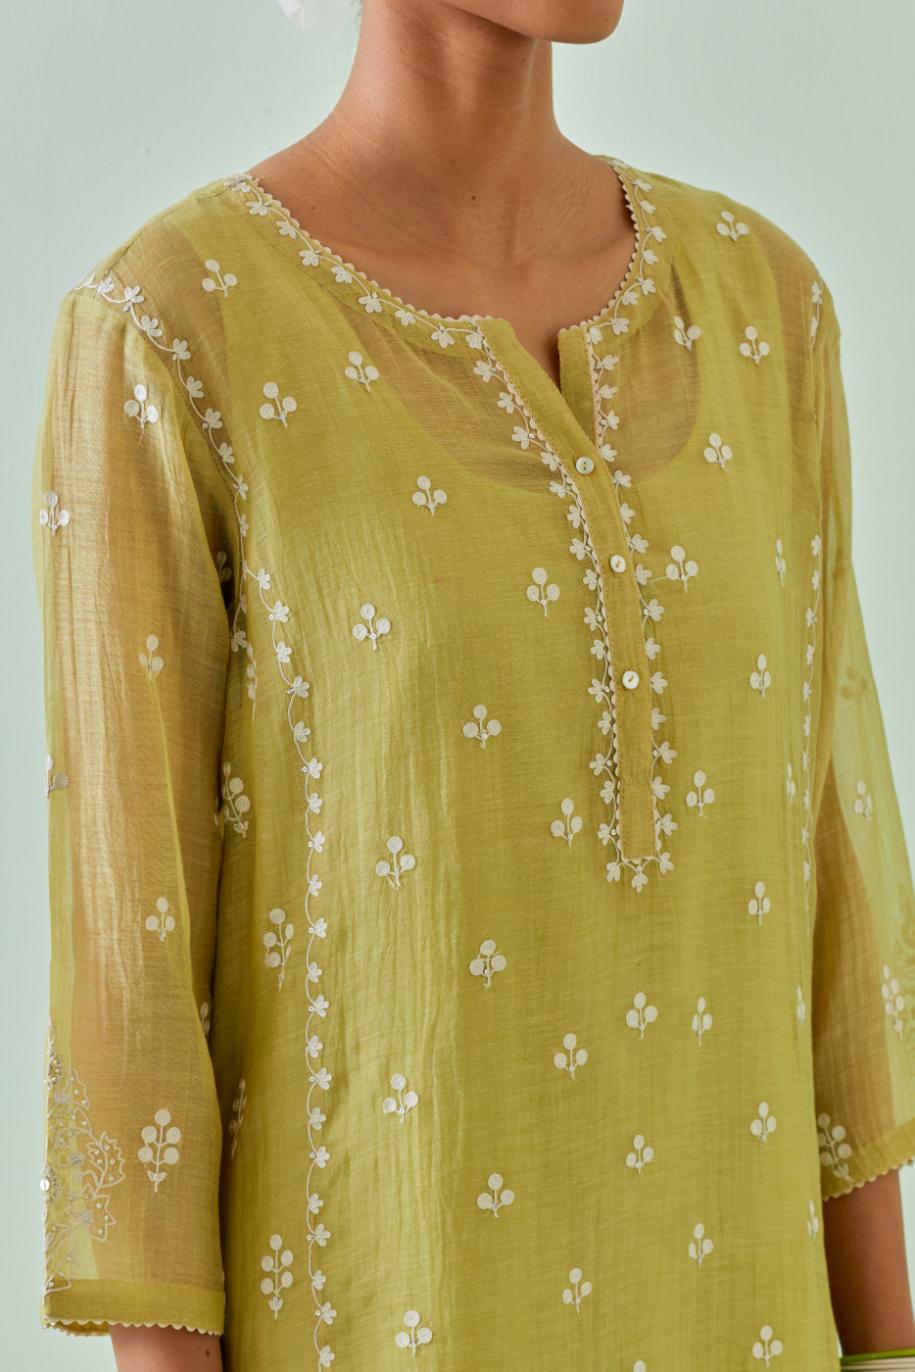 Green straight kurta set with all-over off white Dori embroidery, highlighted with delicate beaded work and embroidery detail at side panel joint seams.